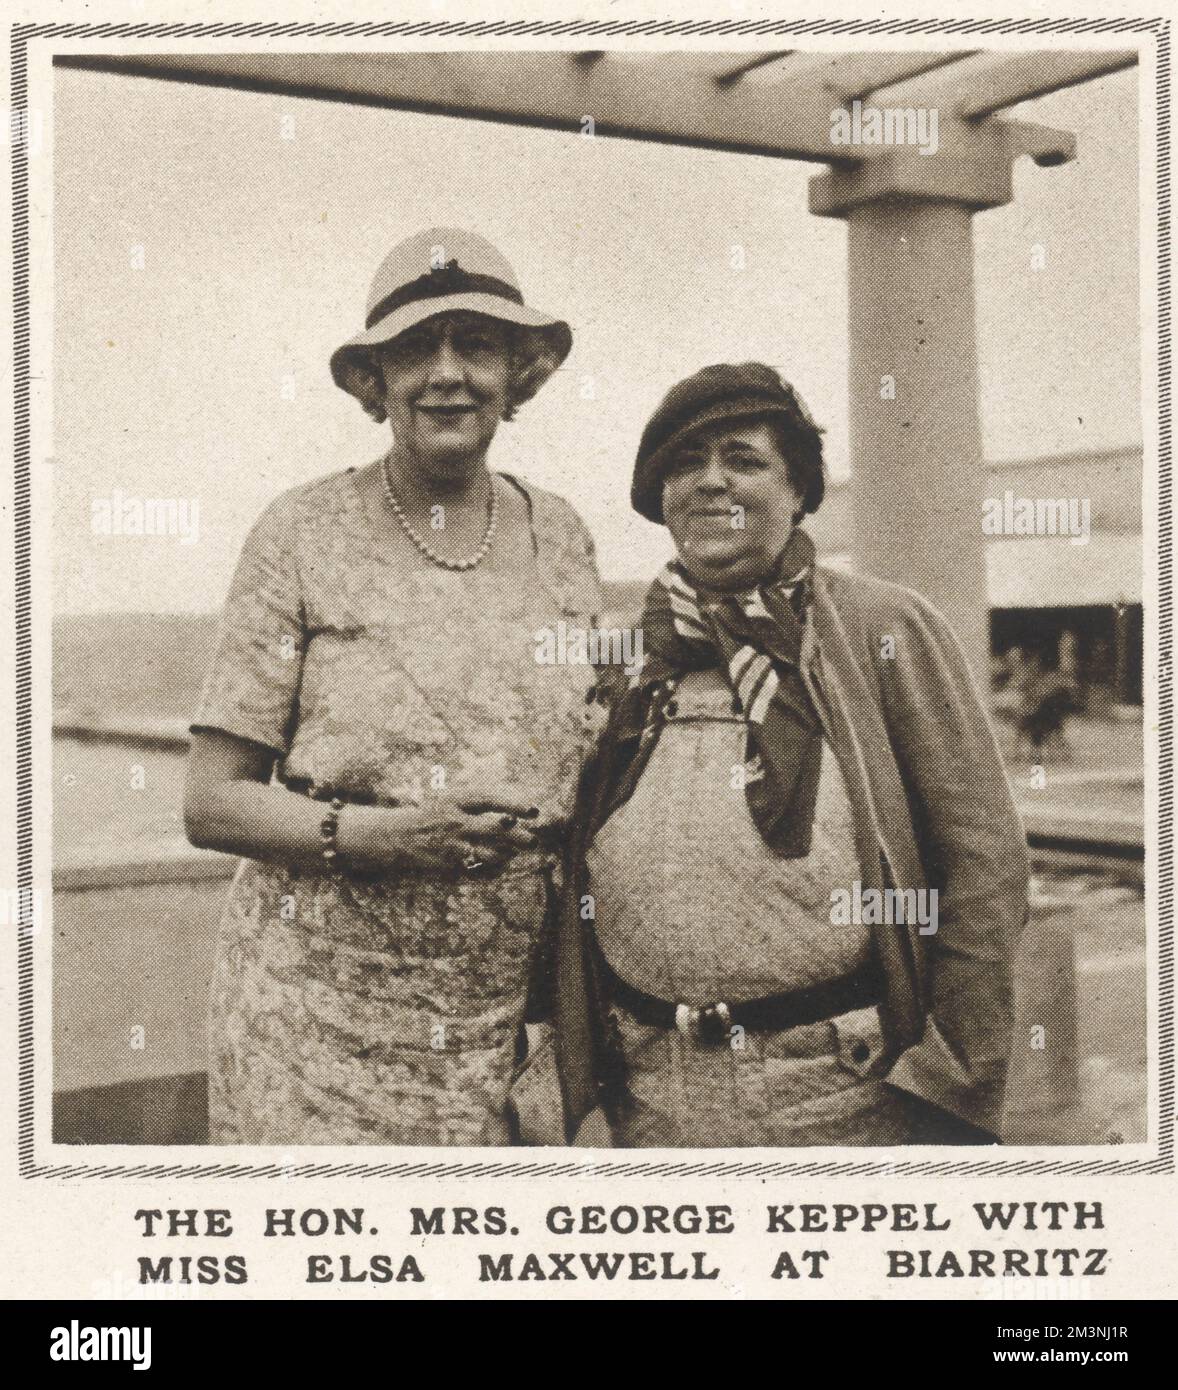 Mrs George Keppel, otherwise known as Alice Keppel, formerly mistress of King Edward VII, pictured here on holiday at Biarritz in 1933 with Elsa Maxwell, American gossip columnist, writer and society hostess.     Date: 1933 Stock Photo